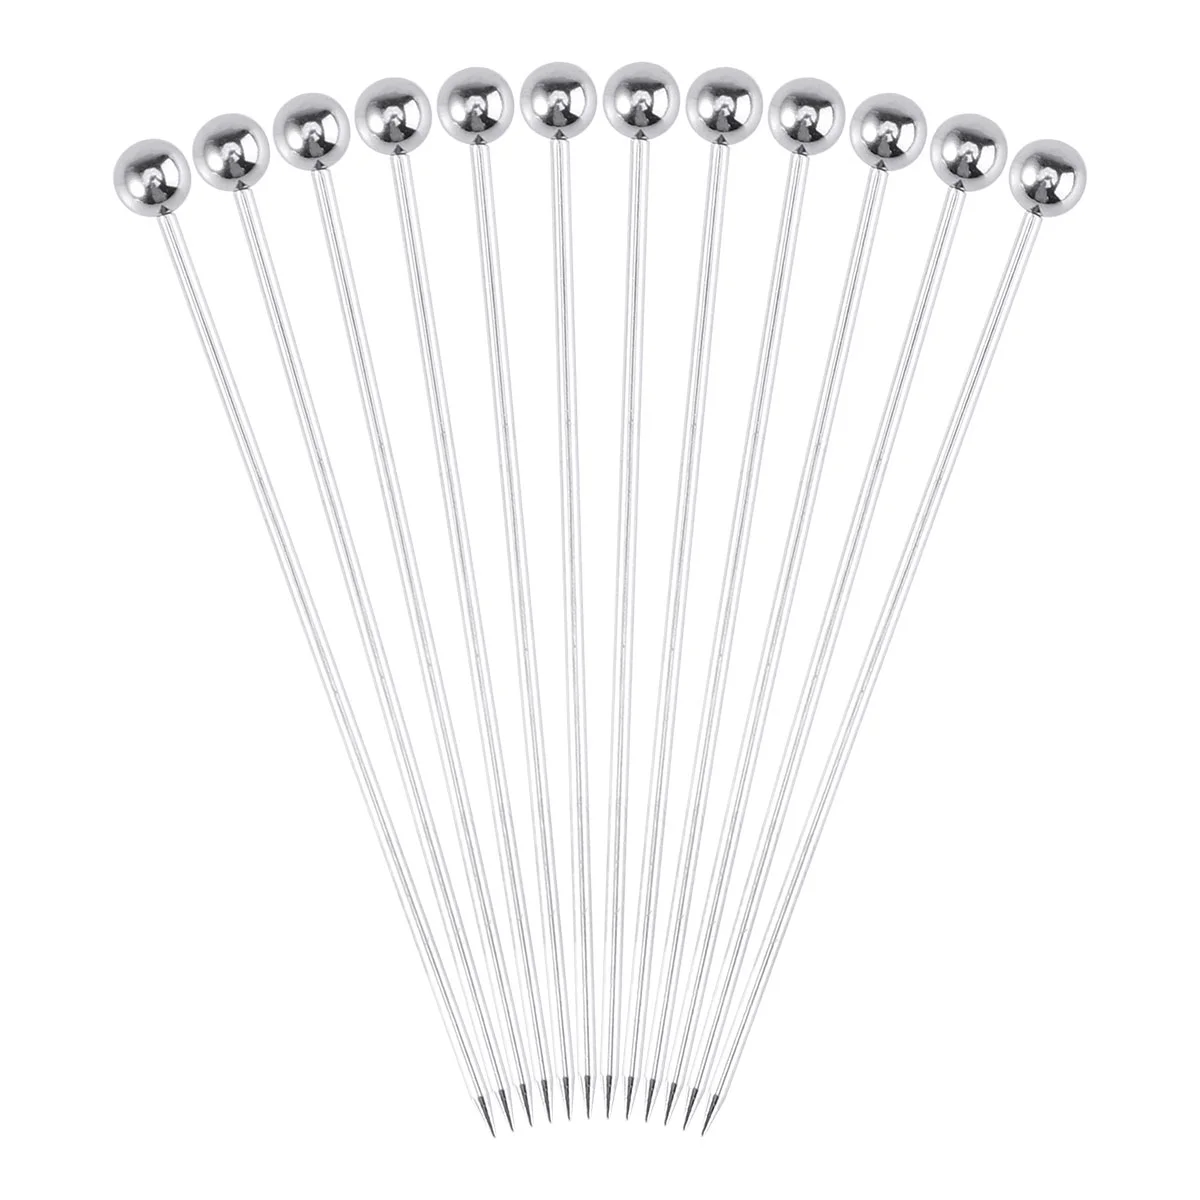 

24pcs Stainless Steel Cocktail Picks Appetizer Toothpicks Cocktail Fruit Sticks Party Supplies Silver